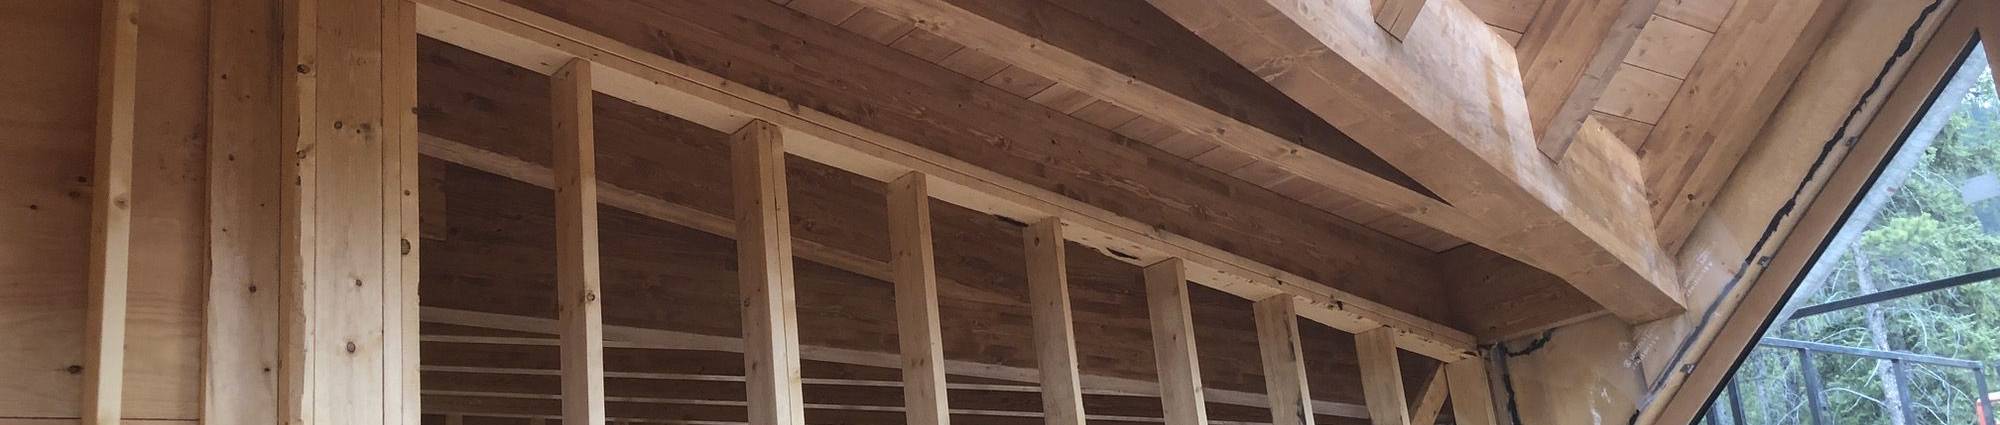 Hybrid timber frame construction with glulam beams and stick frame walls